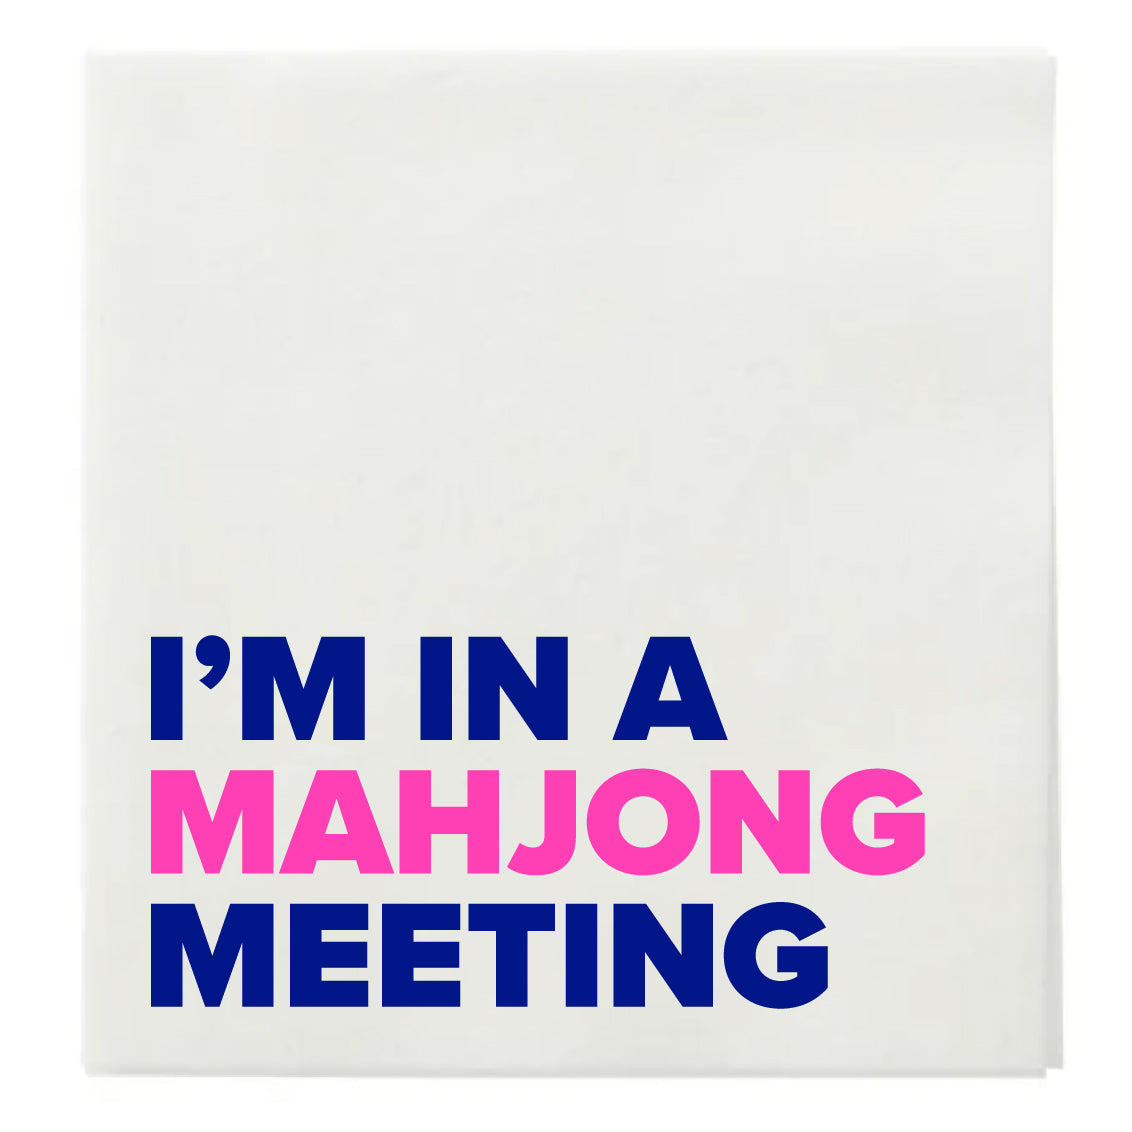 “ I’M IN A MAHJONG MEETING” COCKTAIL NAPKINS